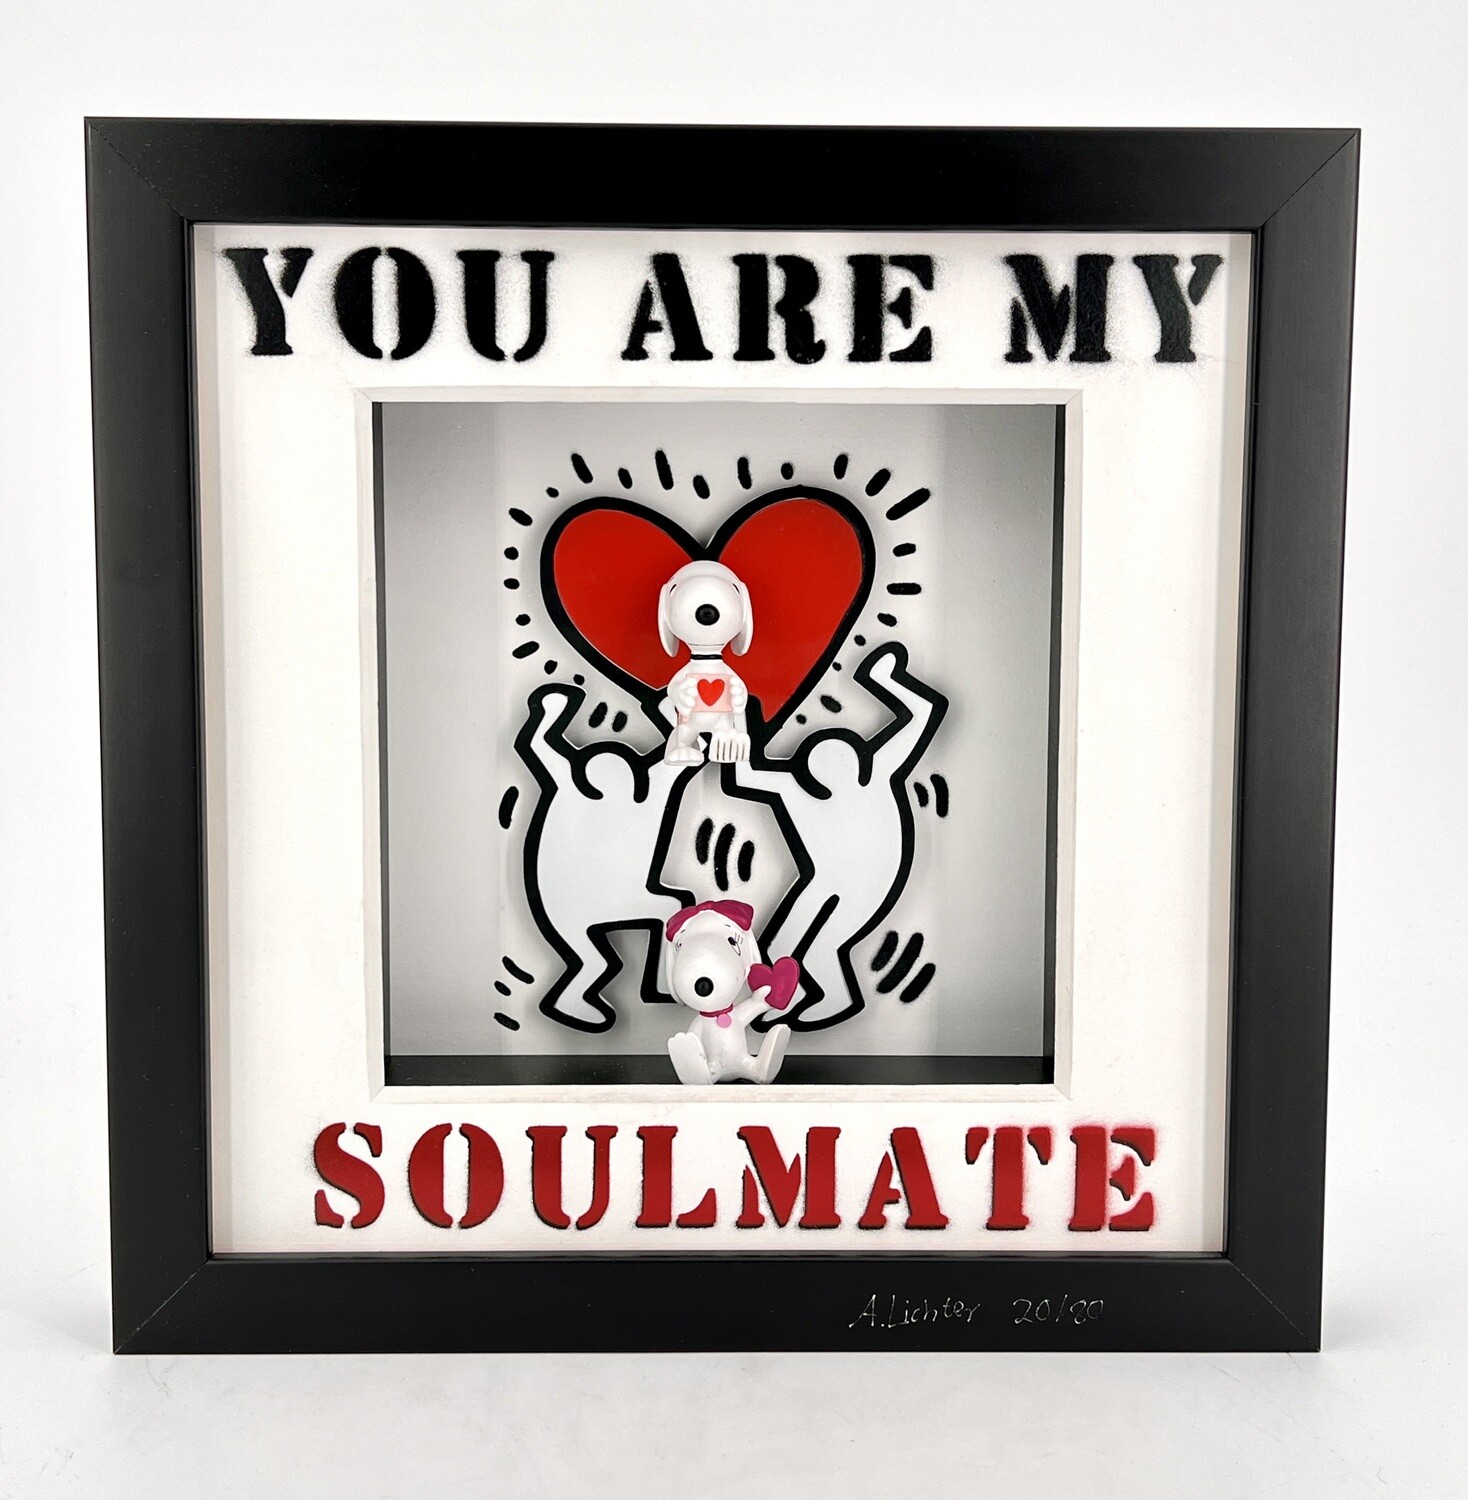 Andreas Lichter "You  are my Soulmate" Snoopy